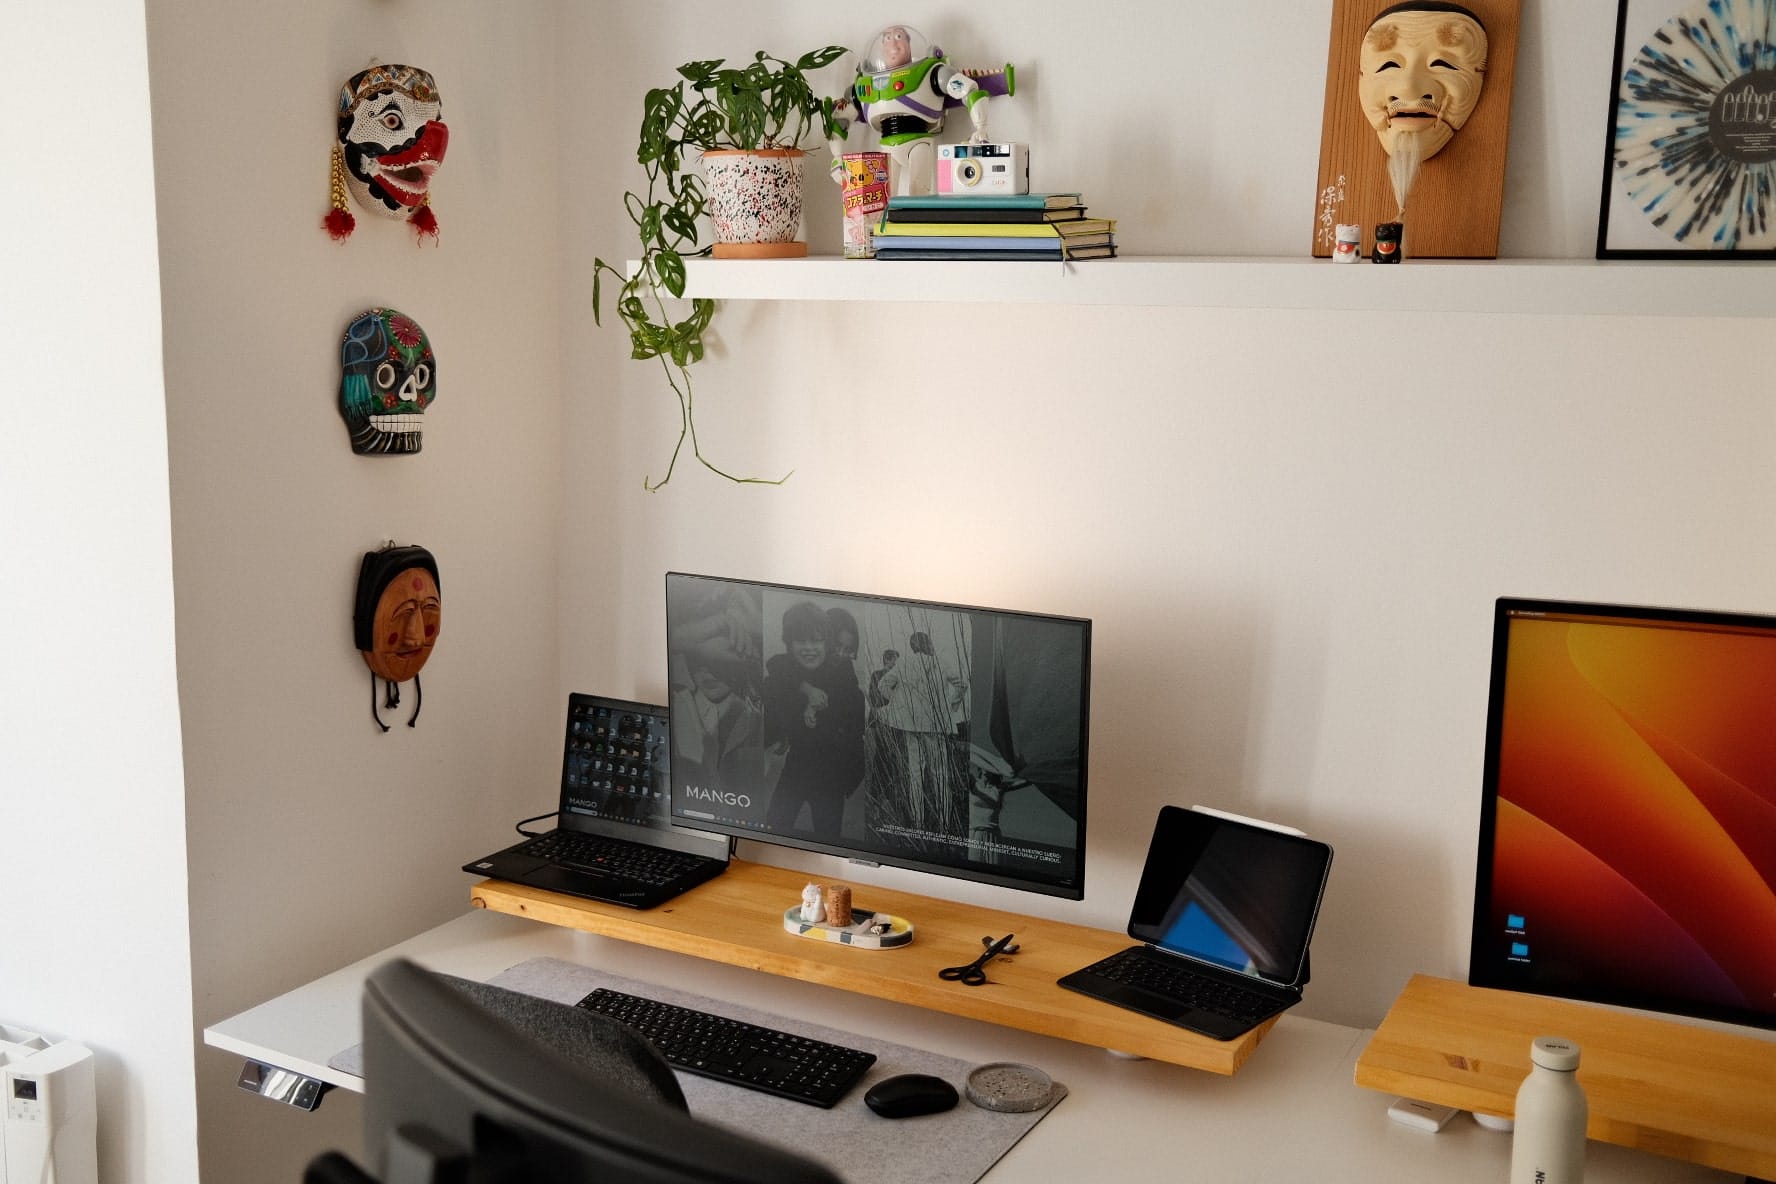 A home office setup with a dual monitor display, decorative masks on the wall, a shelf with a plant and toys, and a desk with various work items